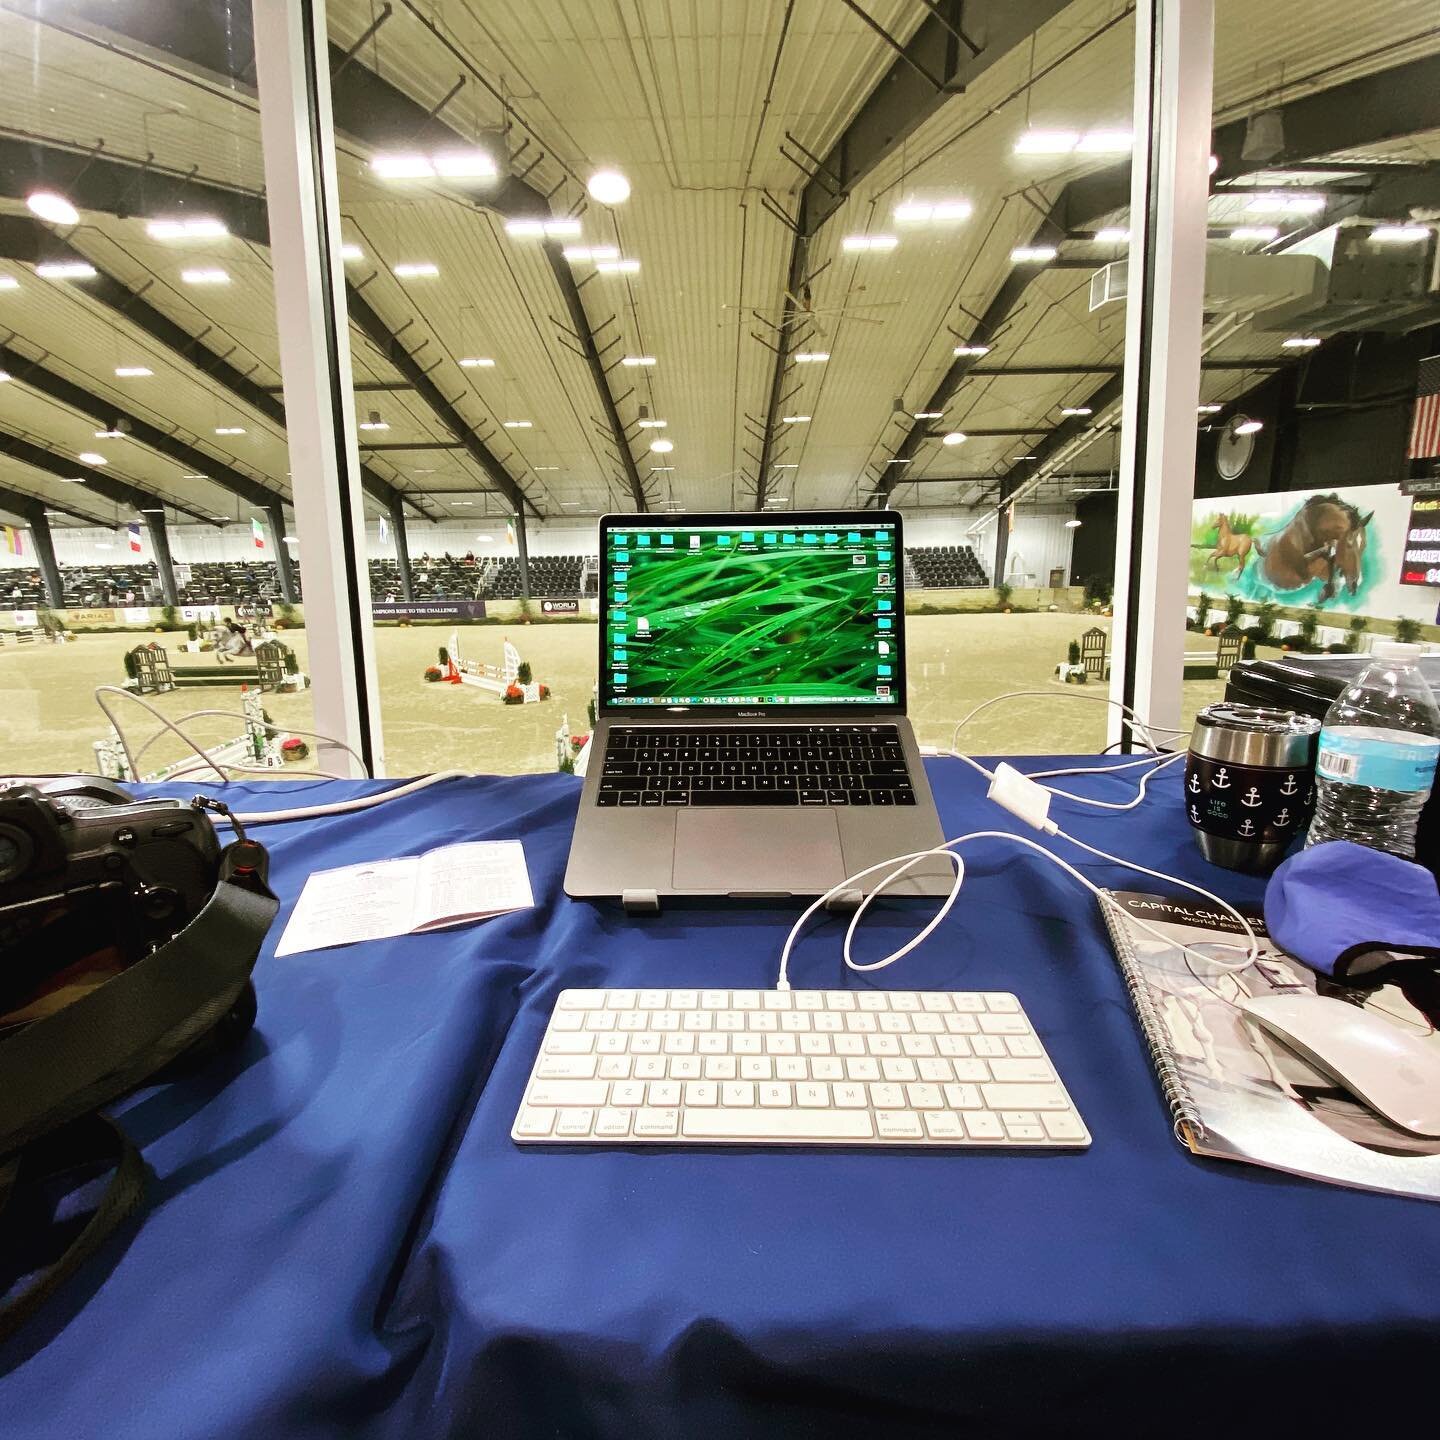 My office for the next 10 days at the Capital Challenge Horse Show at the World Equestrian Center in Ohio. My 26th year! #lovemyjob #horses #horseshowlife #cchs #workingwithfriends